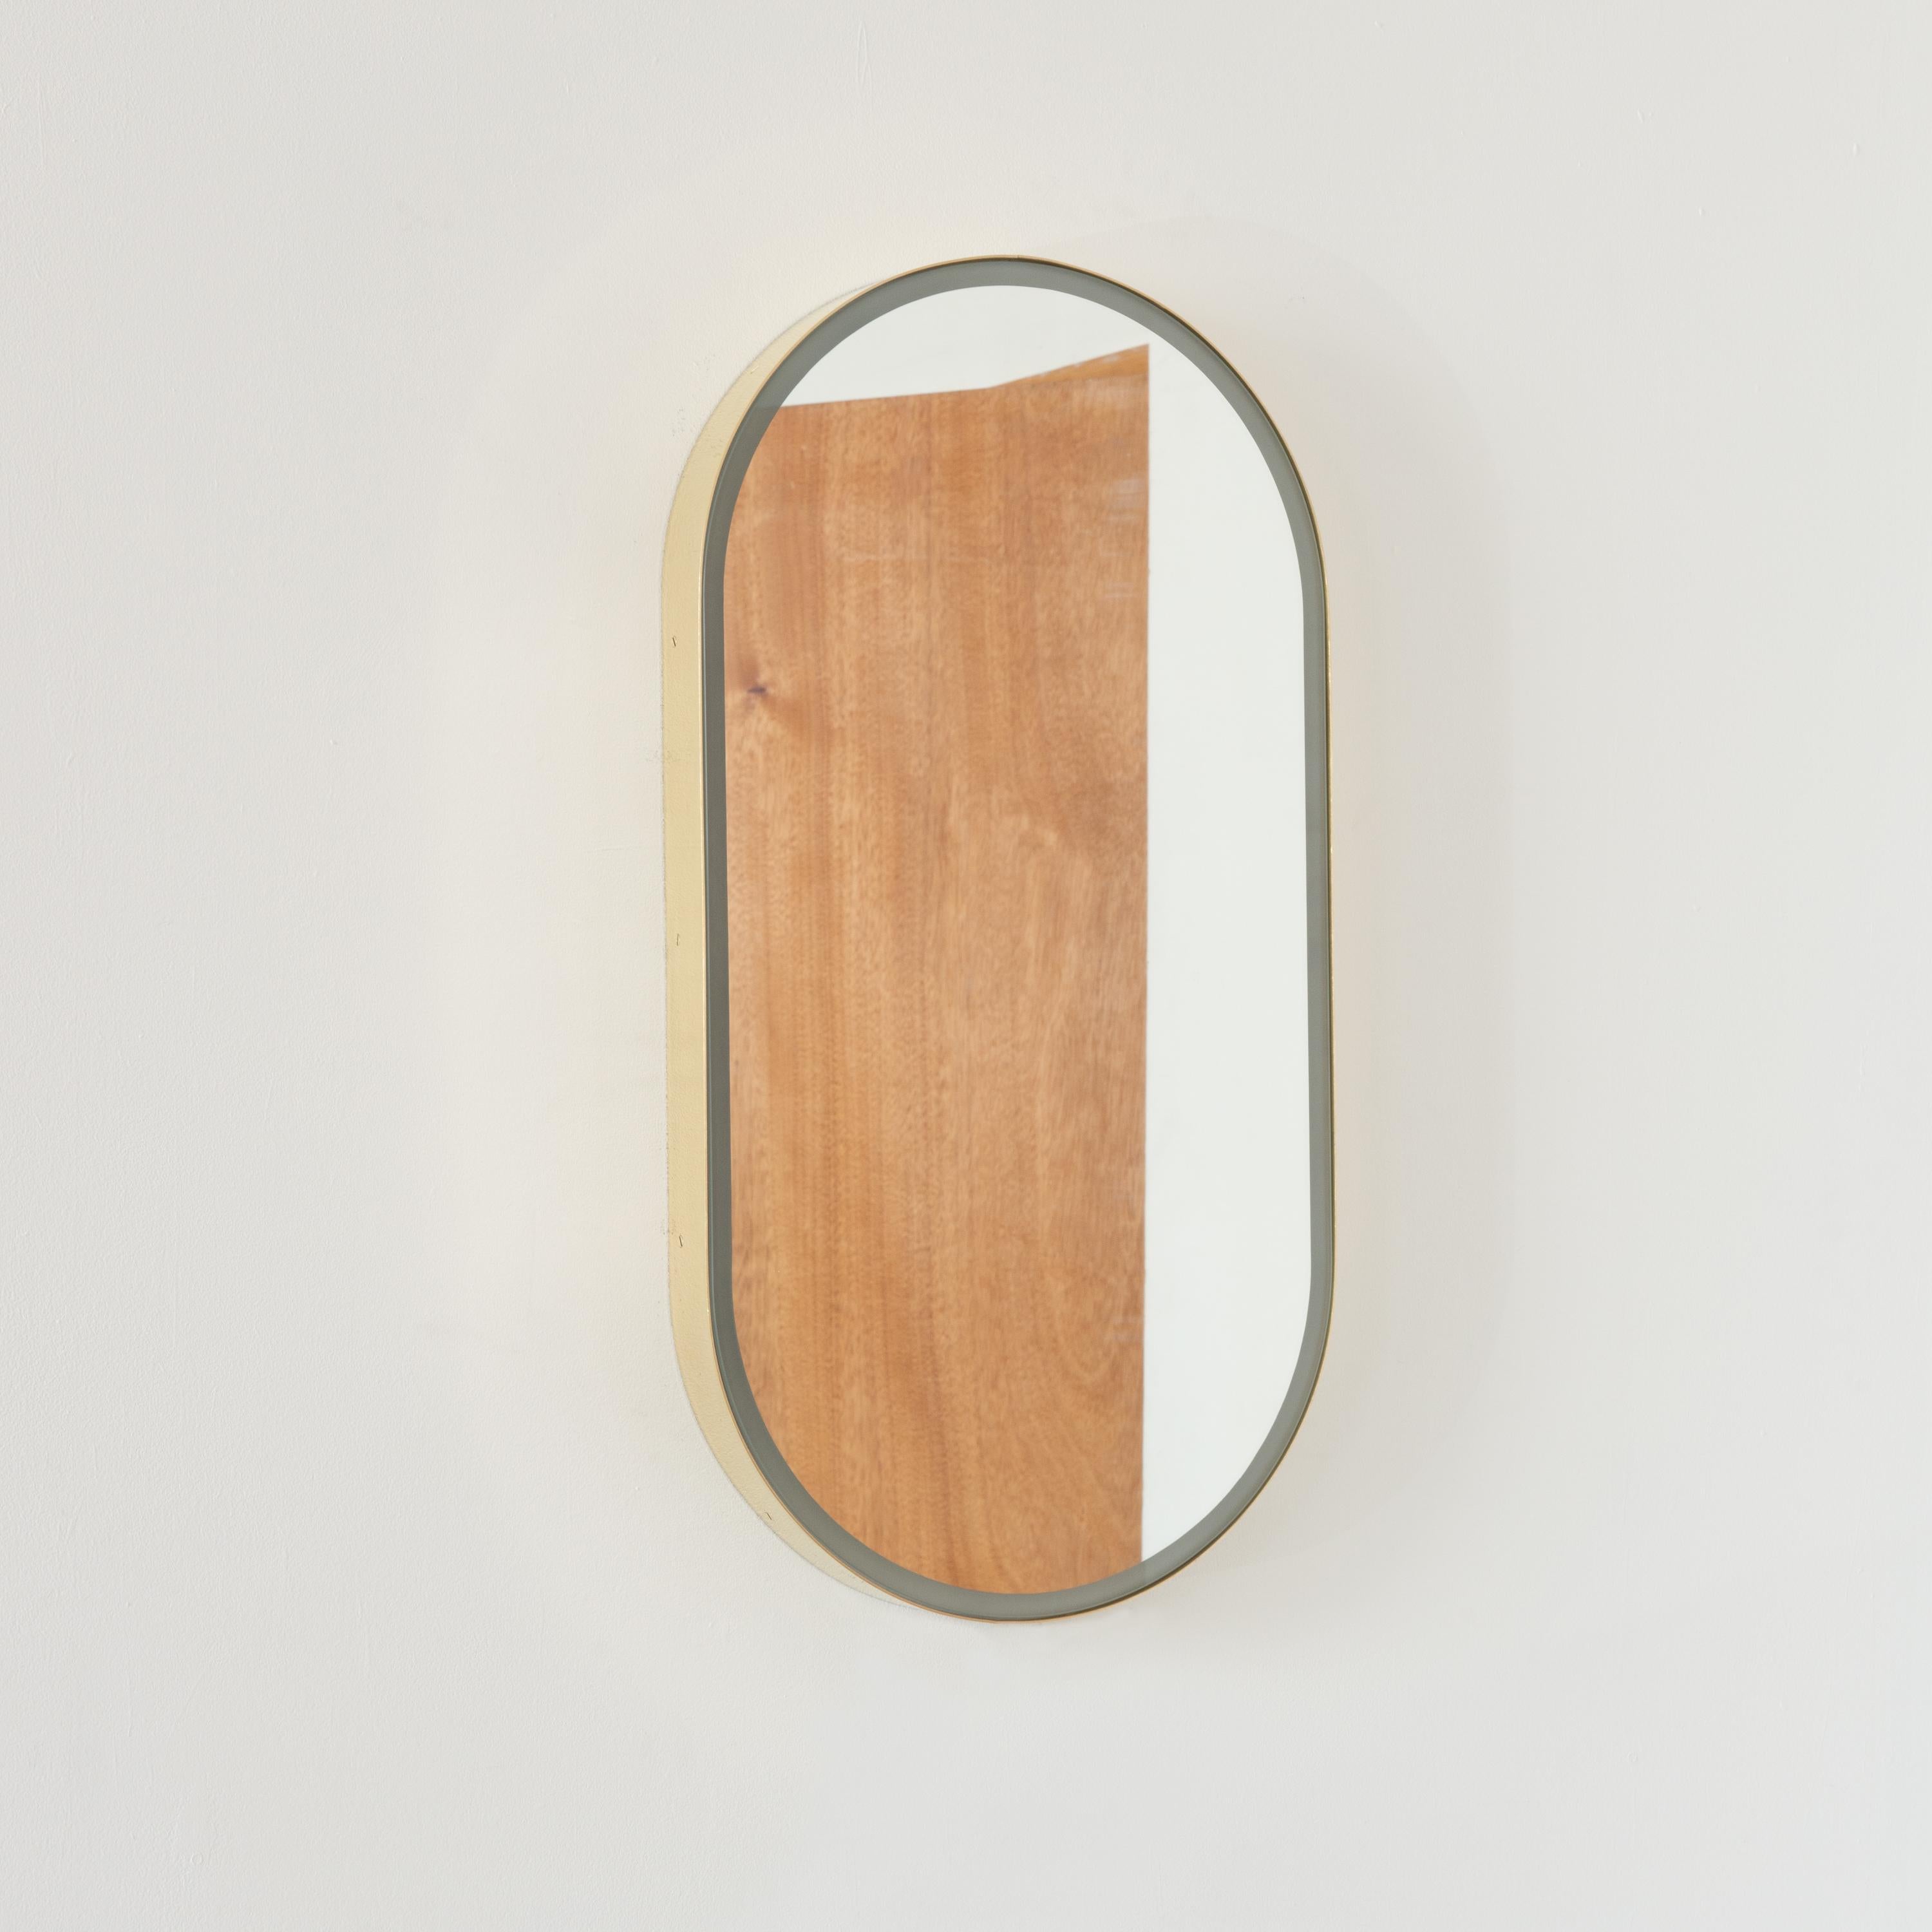 Capsula Illuminated Capsule Shaped Customisable Mirror with Brass Frame, Large For Sale 3